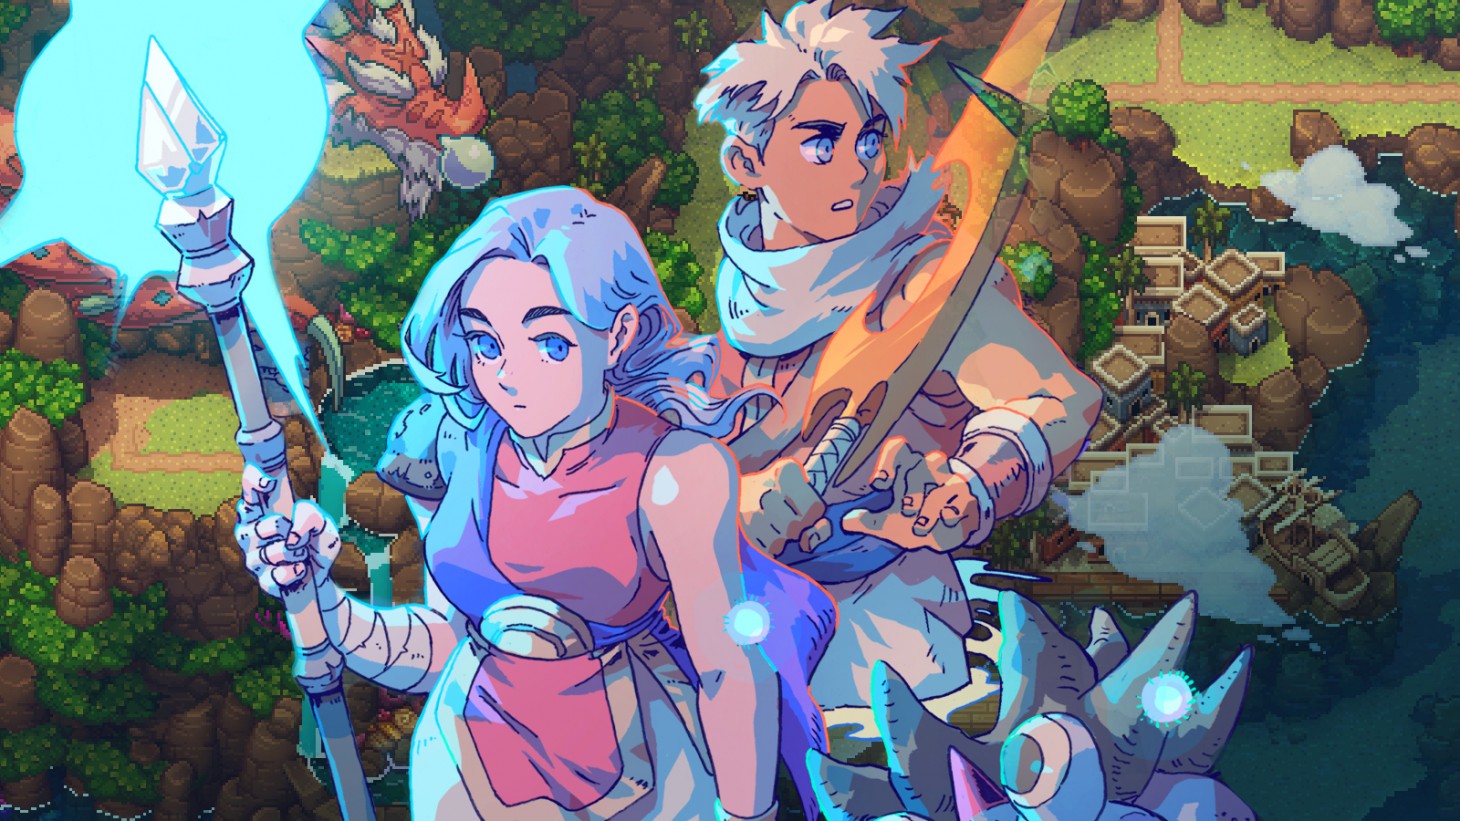 Sea of Stars Review (Switch): One Of The Year's Best RPGs!